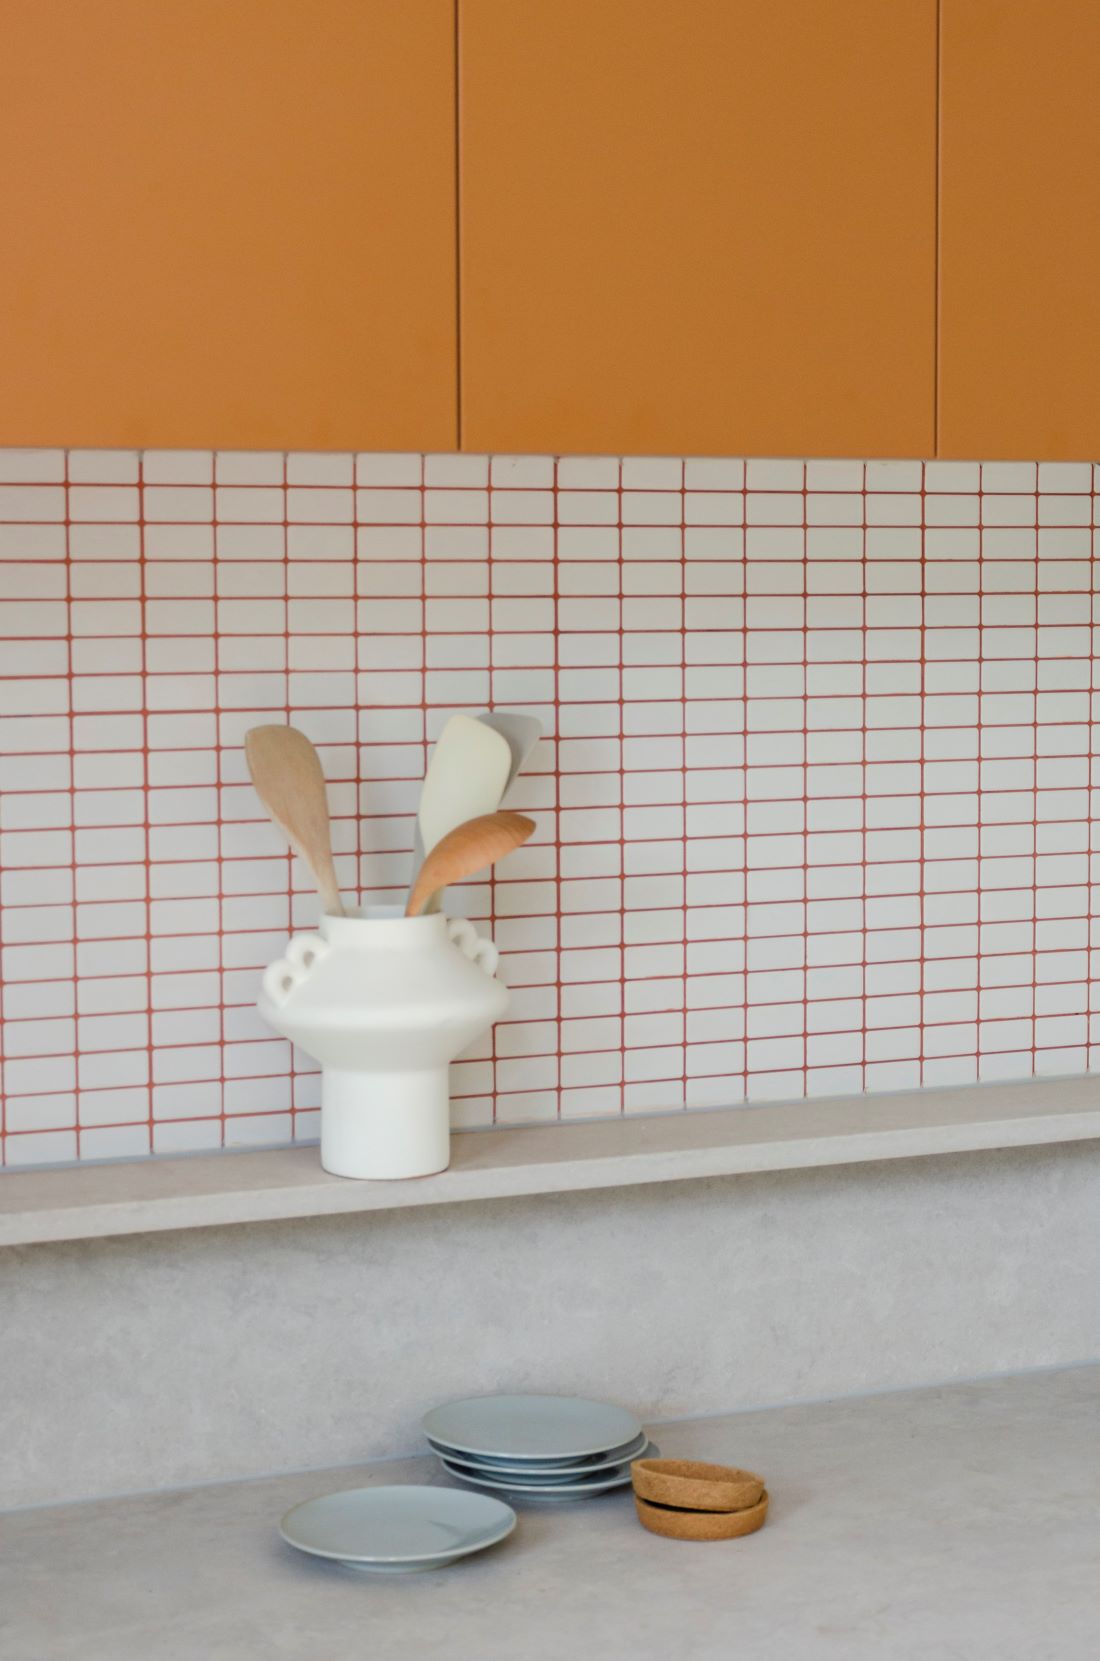 coloured kitchen grout